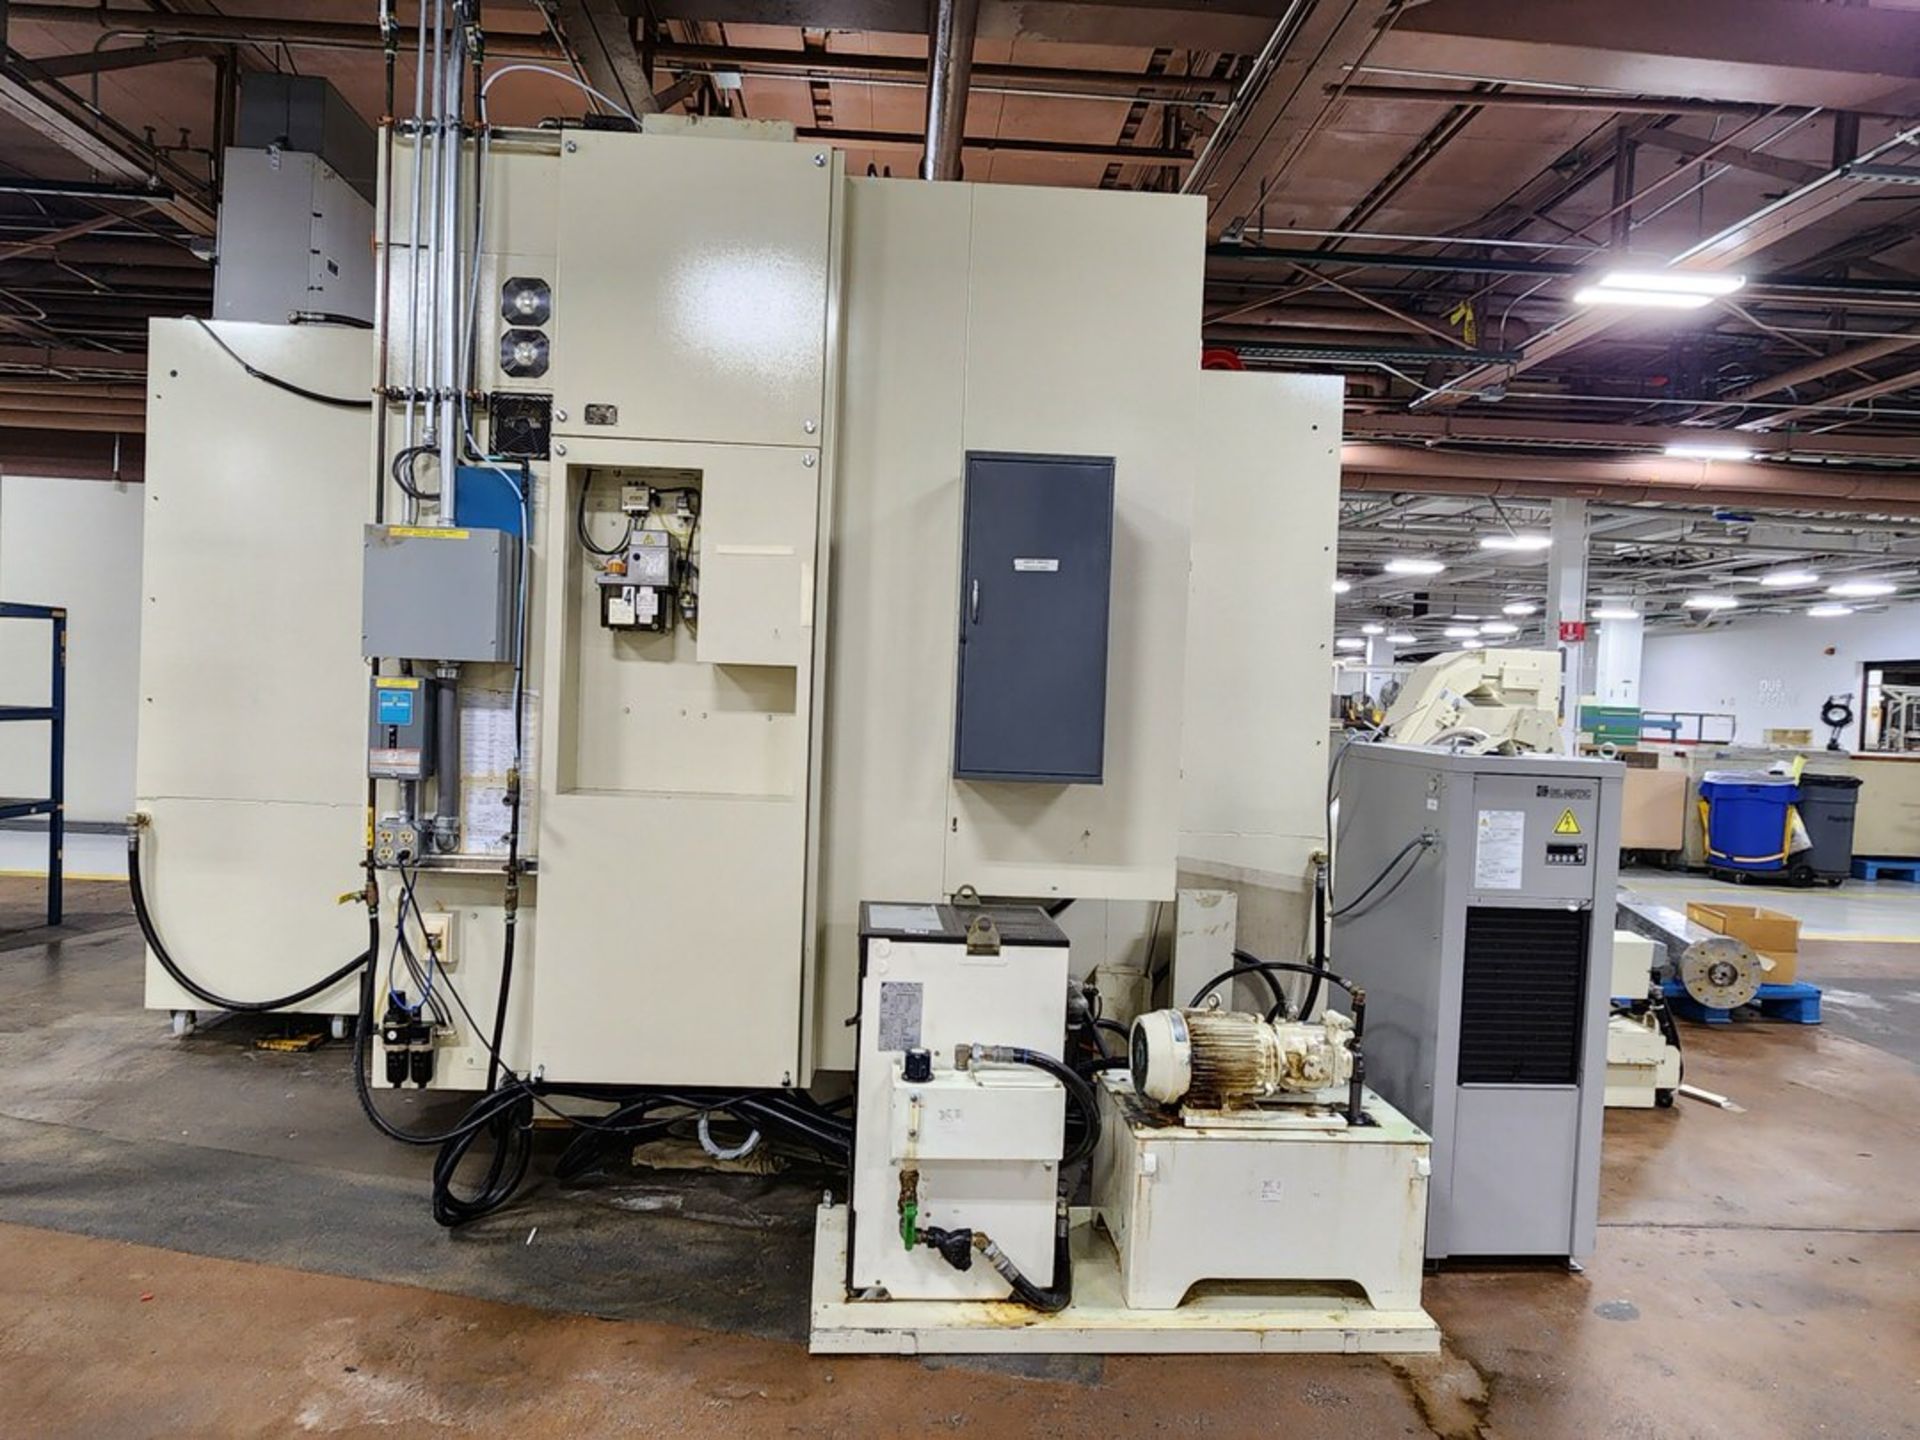 2008 Kitamura 7HiF Vertical Machining Center W/ Fanuc Series 16i-MB; 30,000 Spindle Speed; - Image 14 of 23